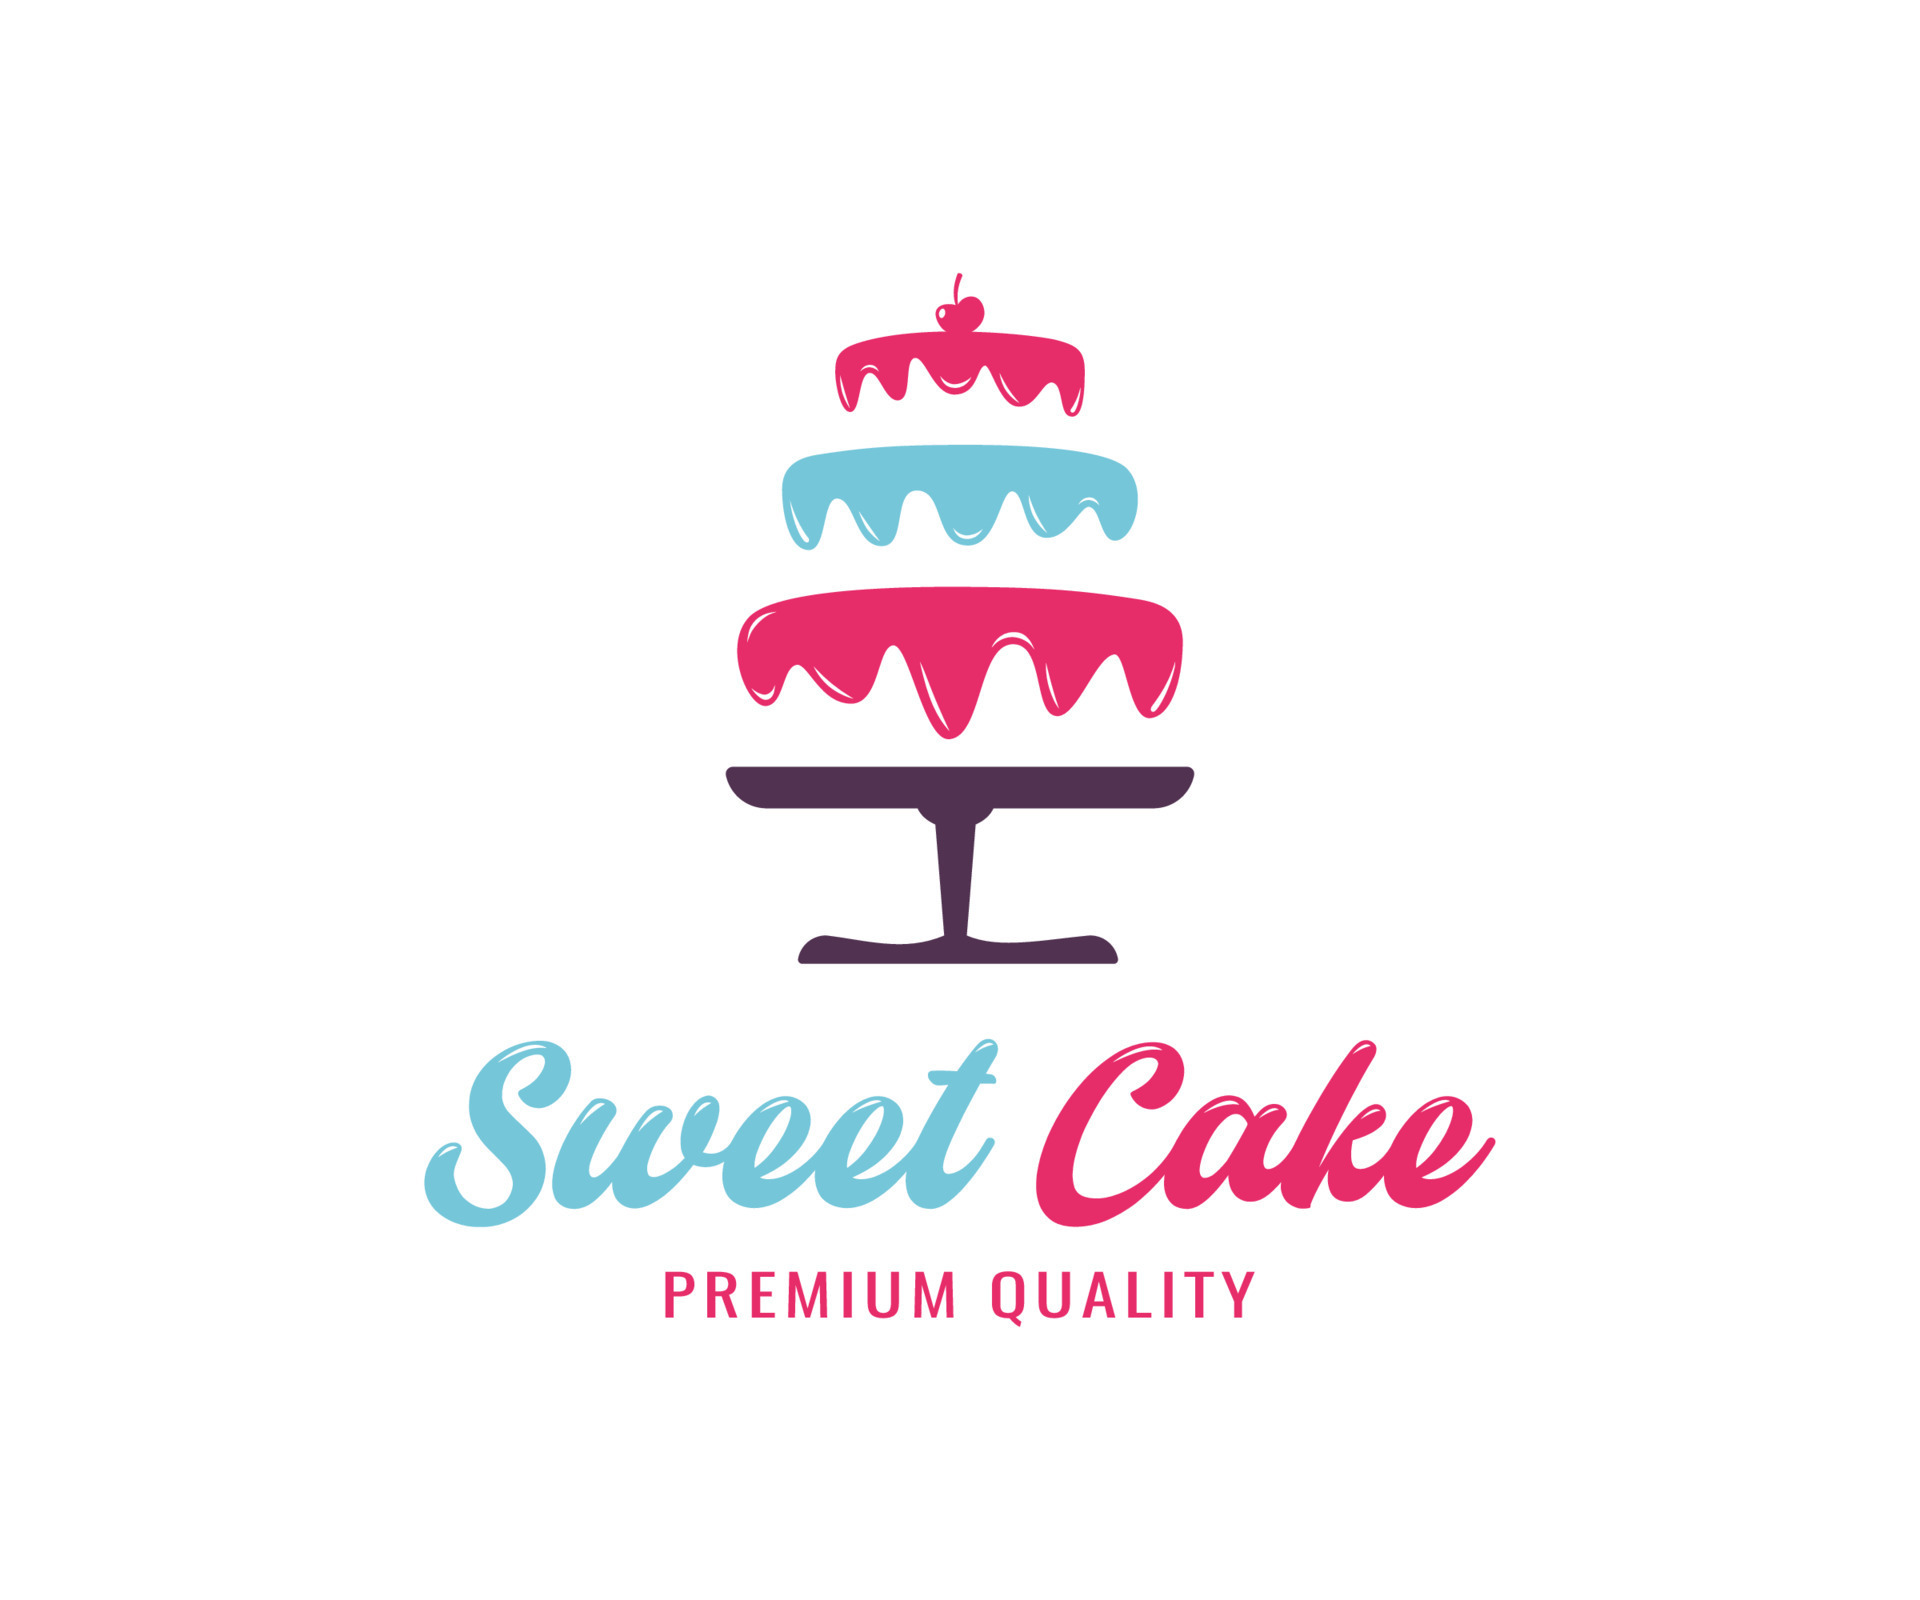 Share more than 161 cake and chocolate logo best